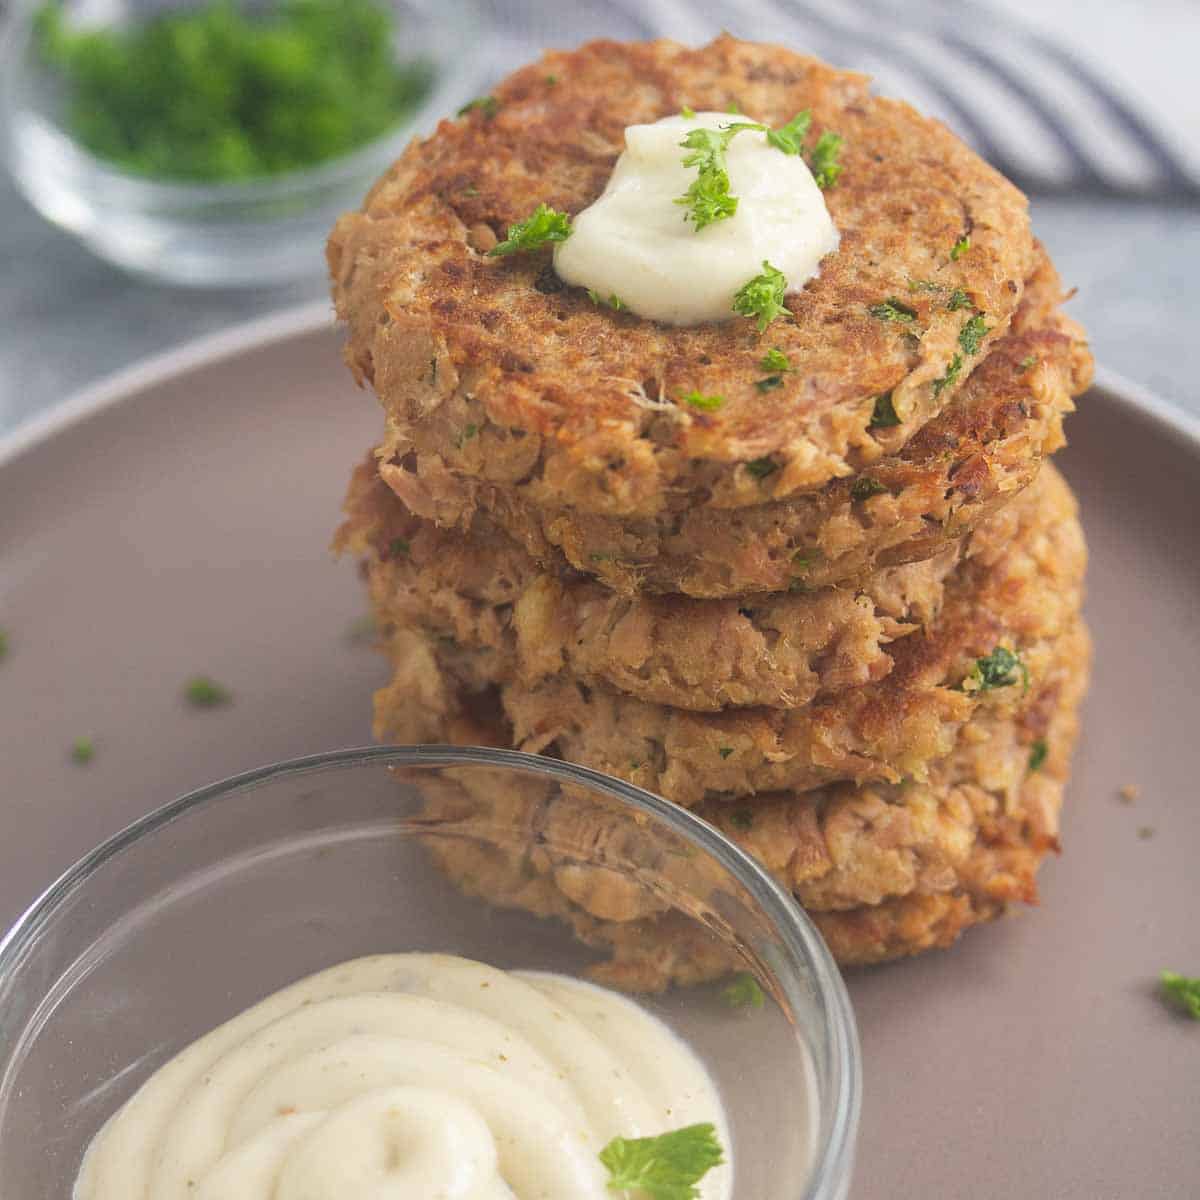 A stack of six tuna patties with a dollop of tartar sauce on a plate.